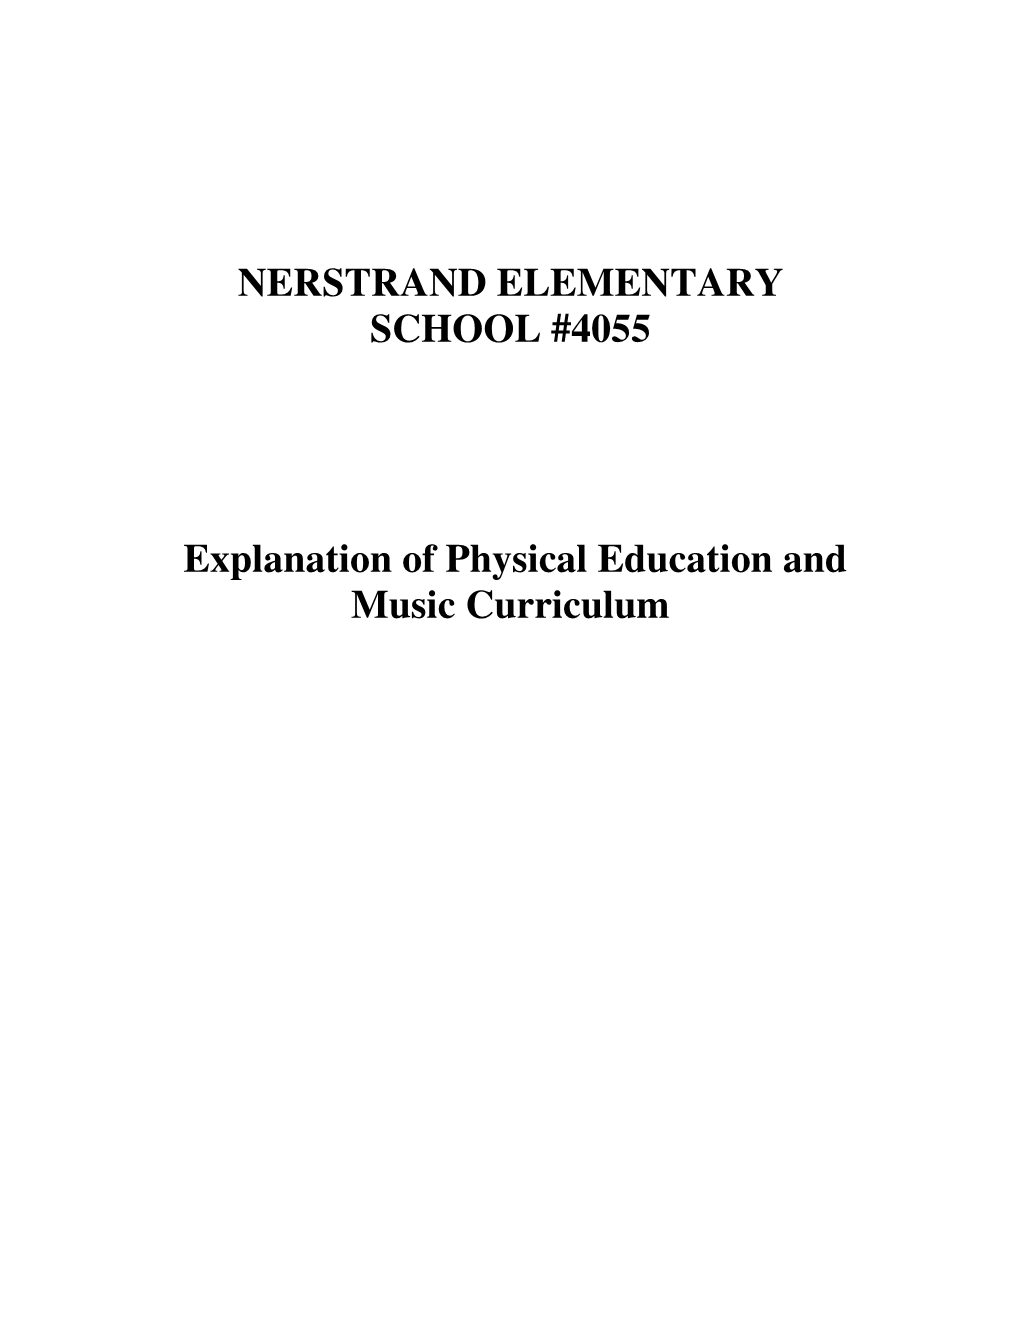 Physical Education and Music Curriculum